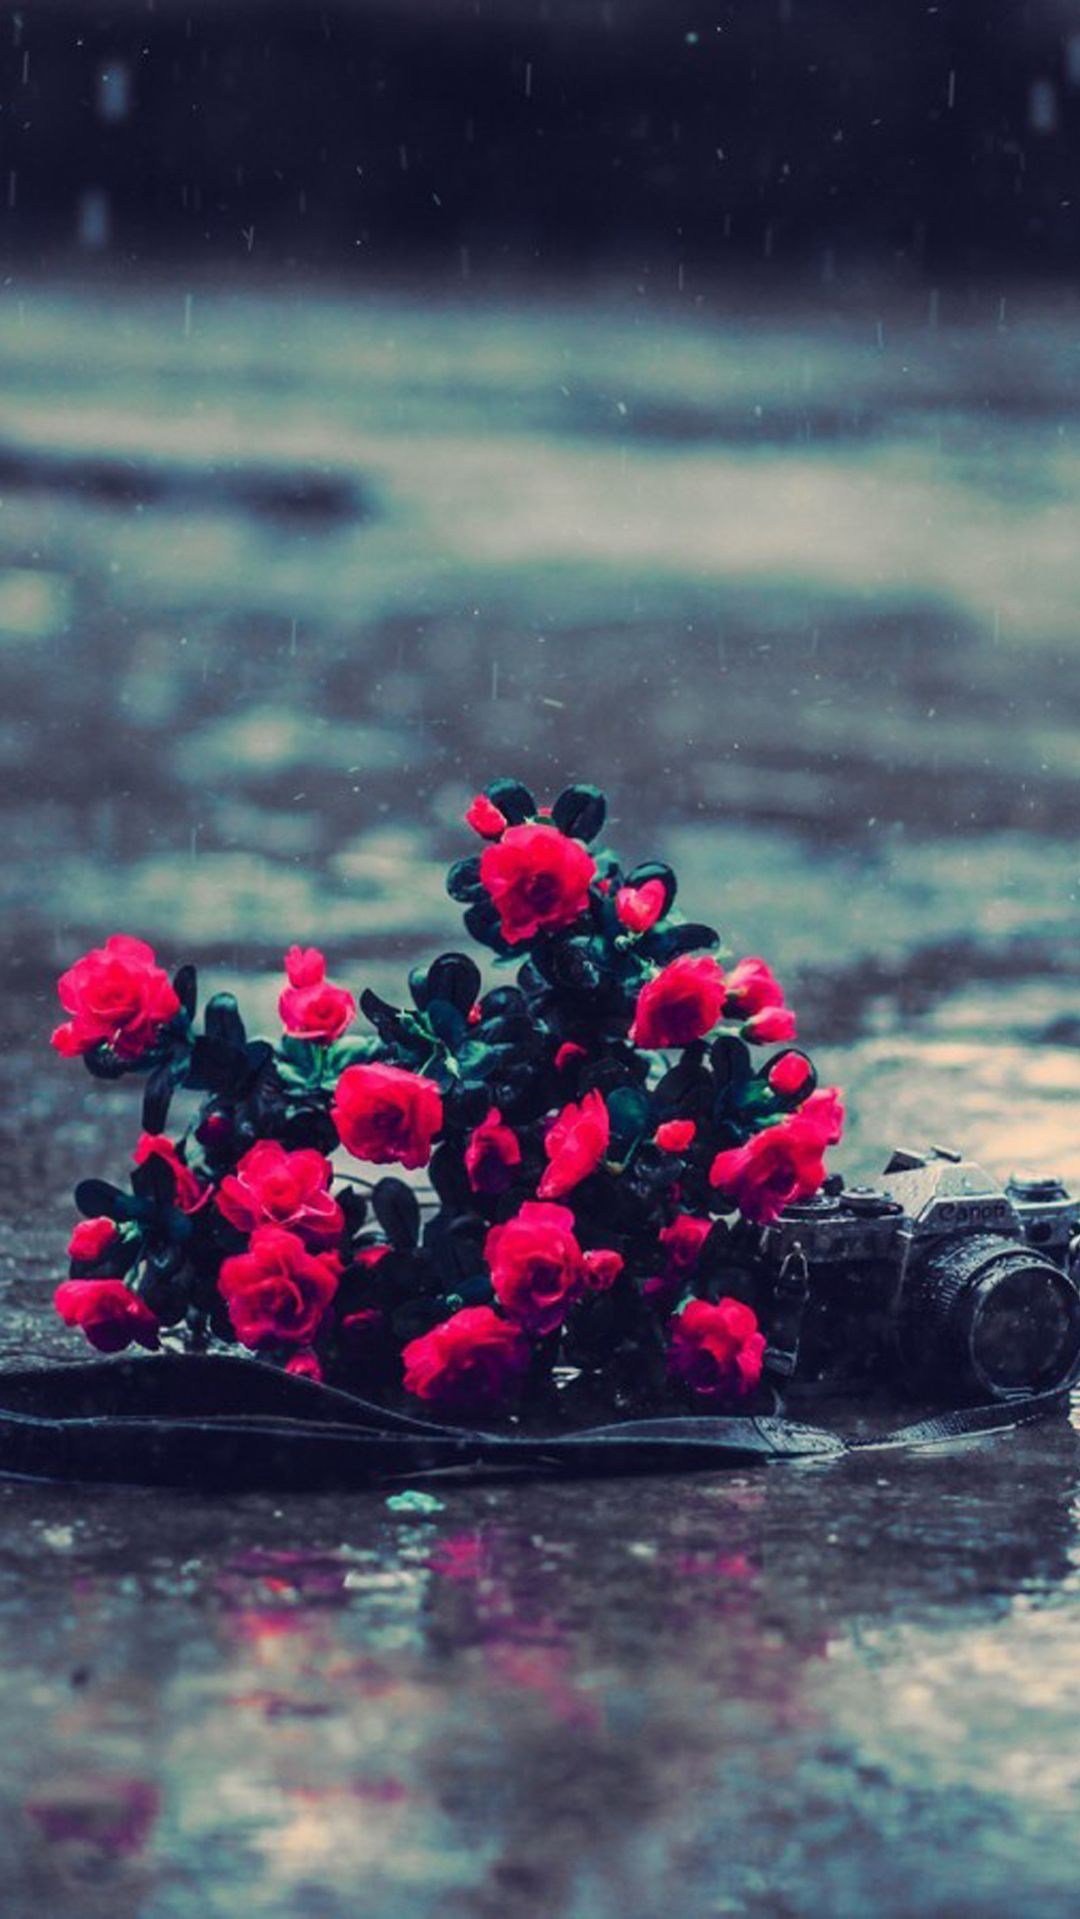 Red Flowers Rainy Day Iphone 6 / 6 Plus And Iphone - Flower Rainy Day Rain - HD Wallpaper 